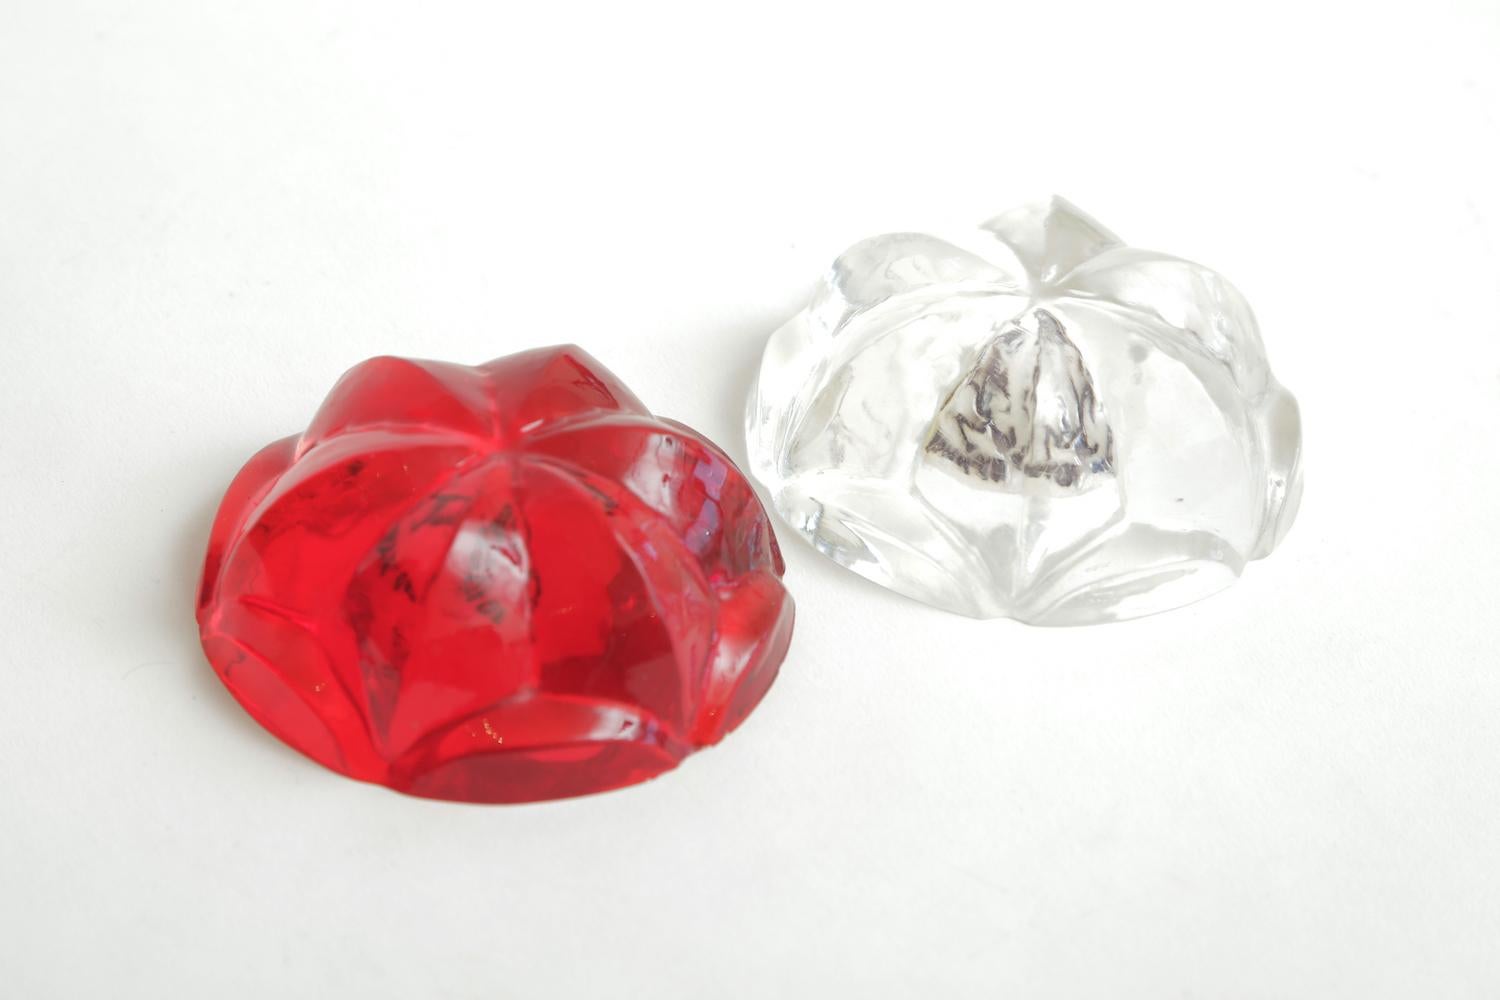 This wonderful pair of Norman Mercer Lucite paperweights are red and clear with a semi flower design. They make a great desk accessory as a sculptural entity. Norman Mercer worked in lucite after studying and having a career in engineering. He was